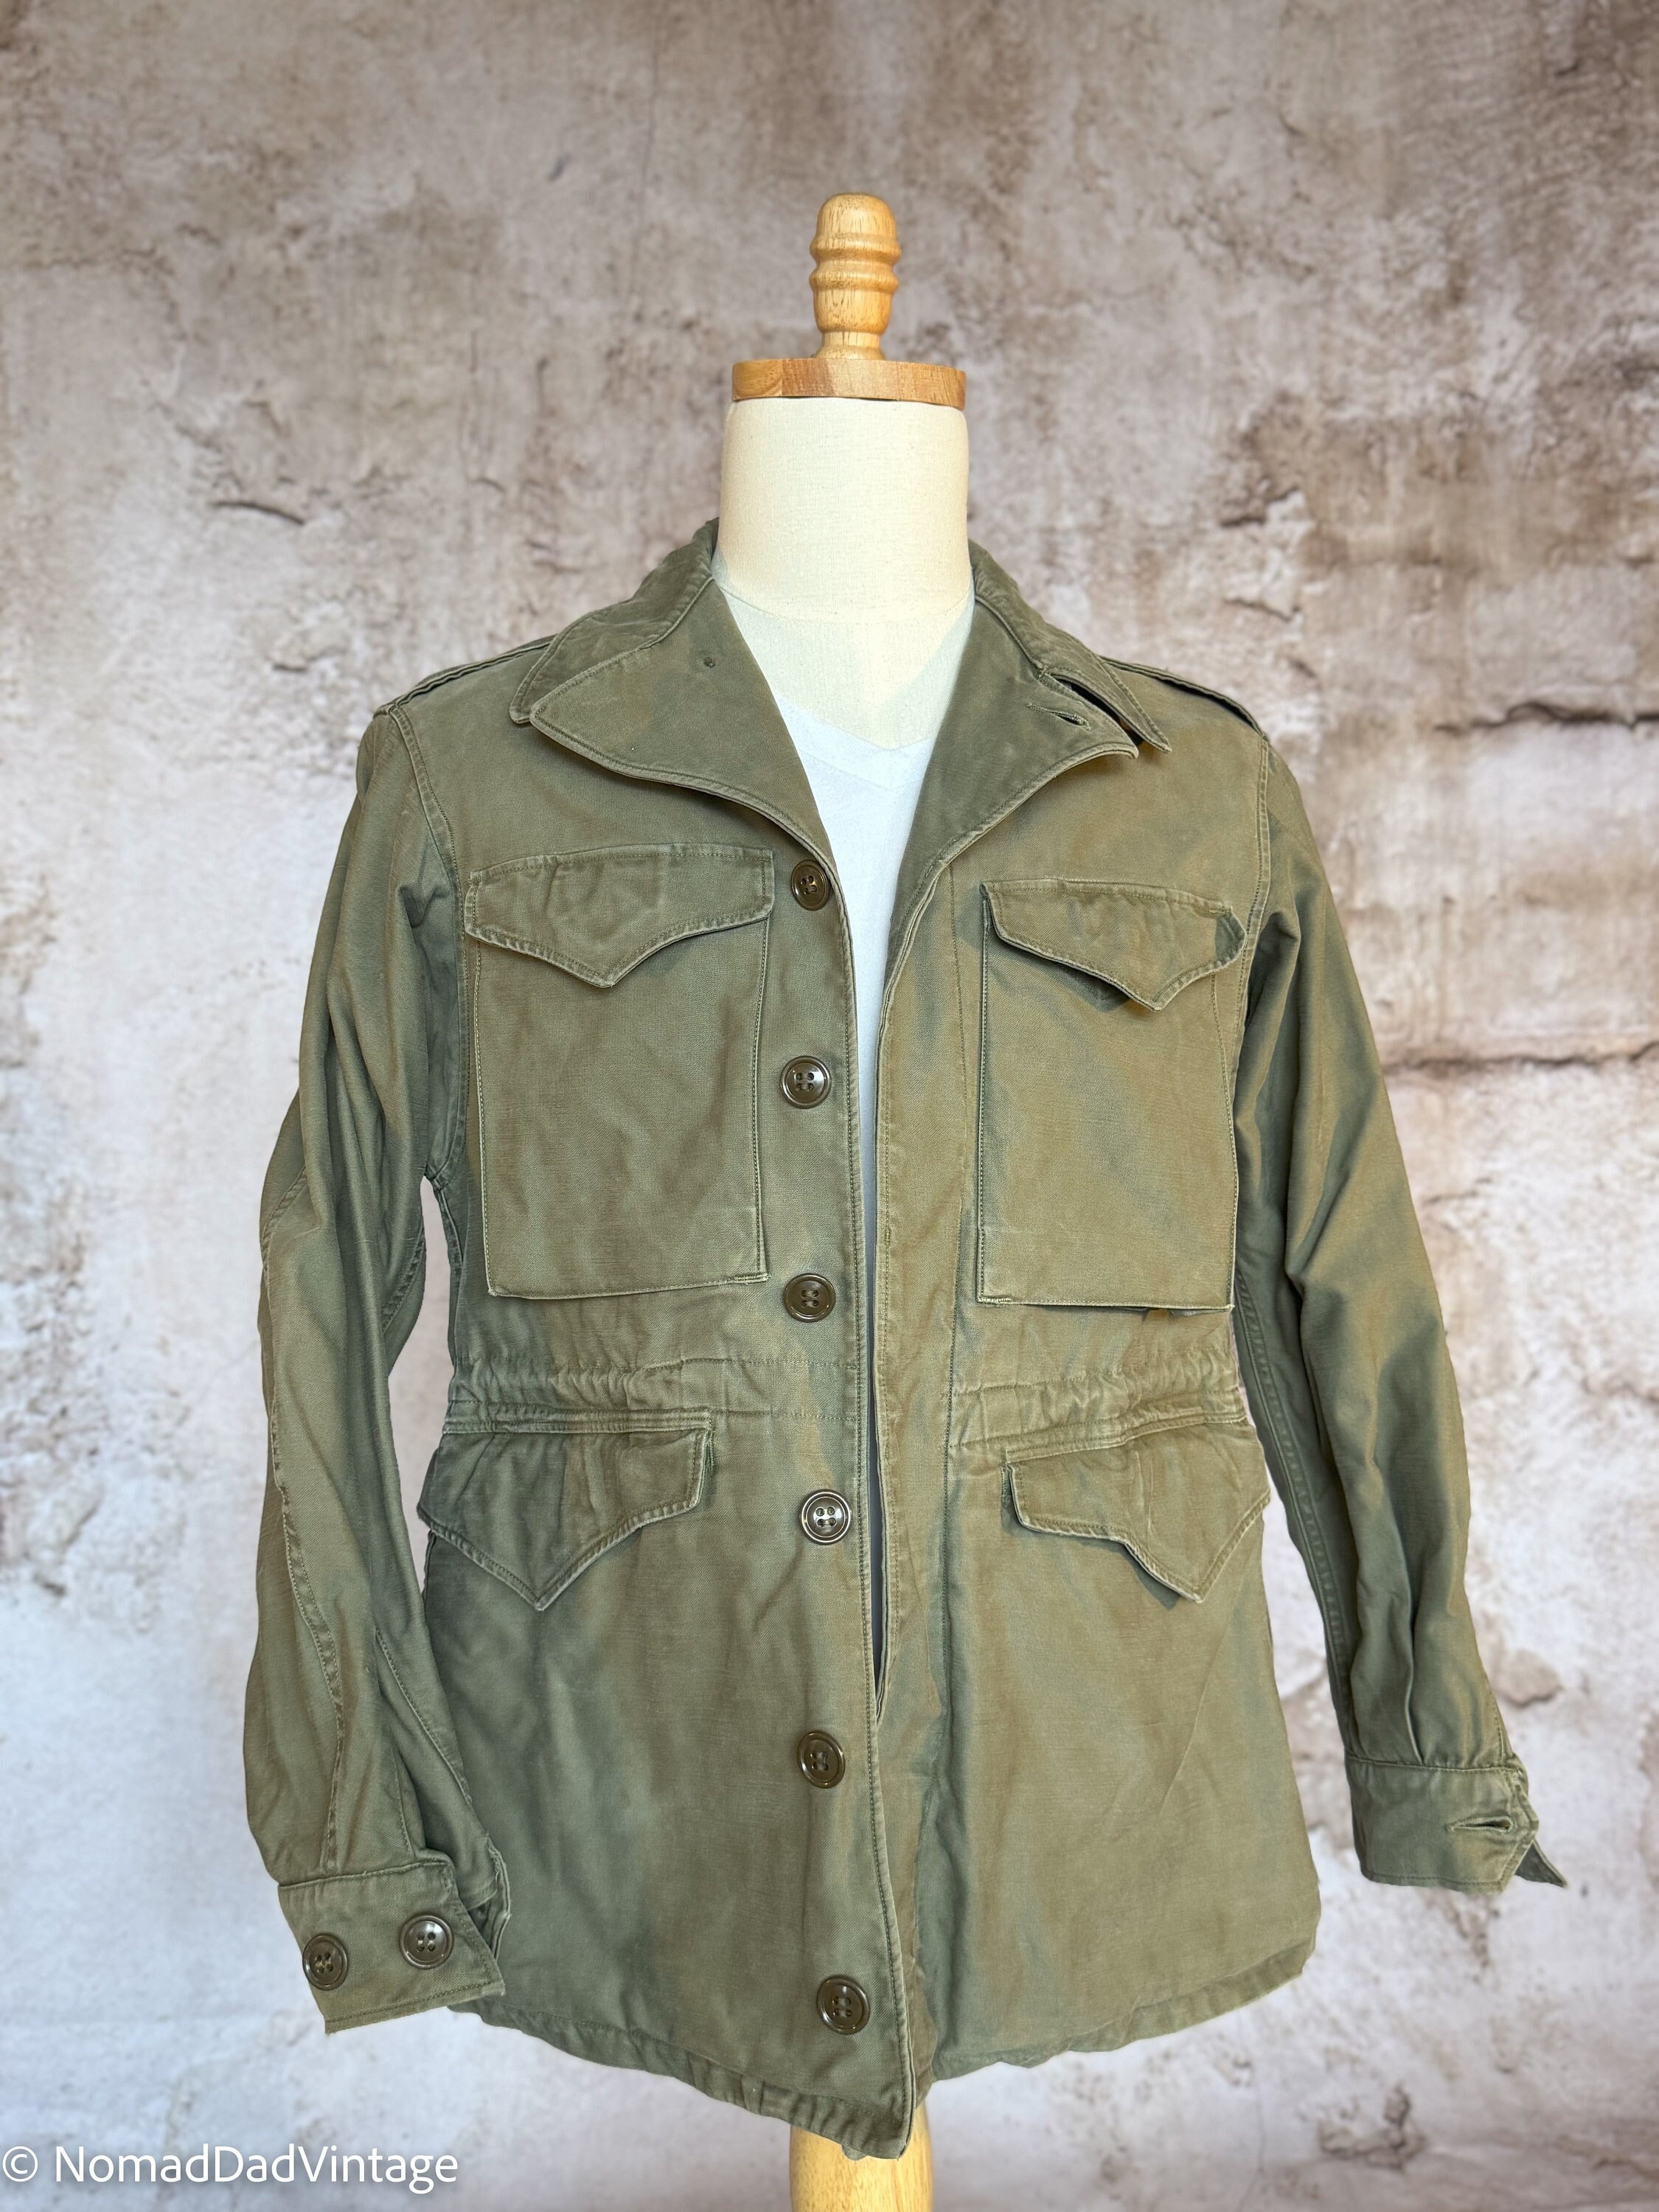 Rare Original M43 Military Field Jacket from WWII